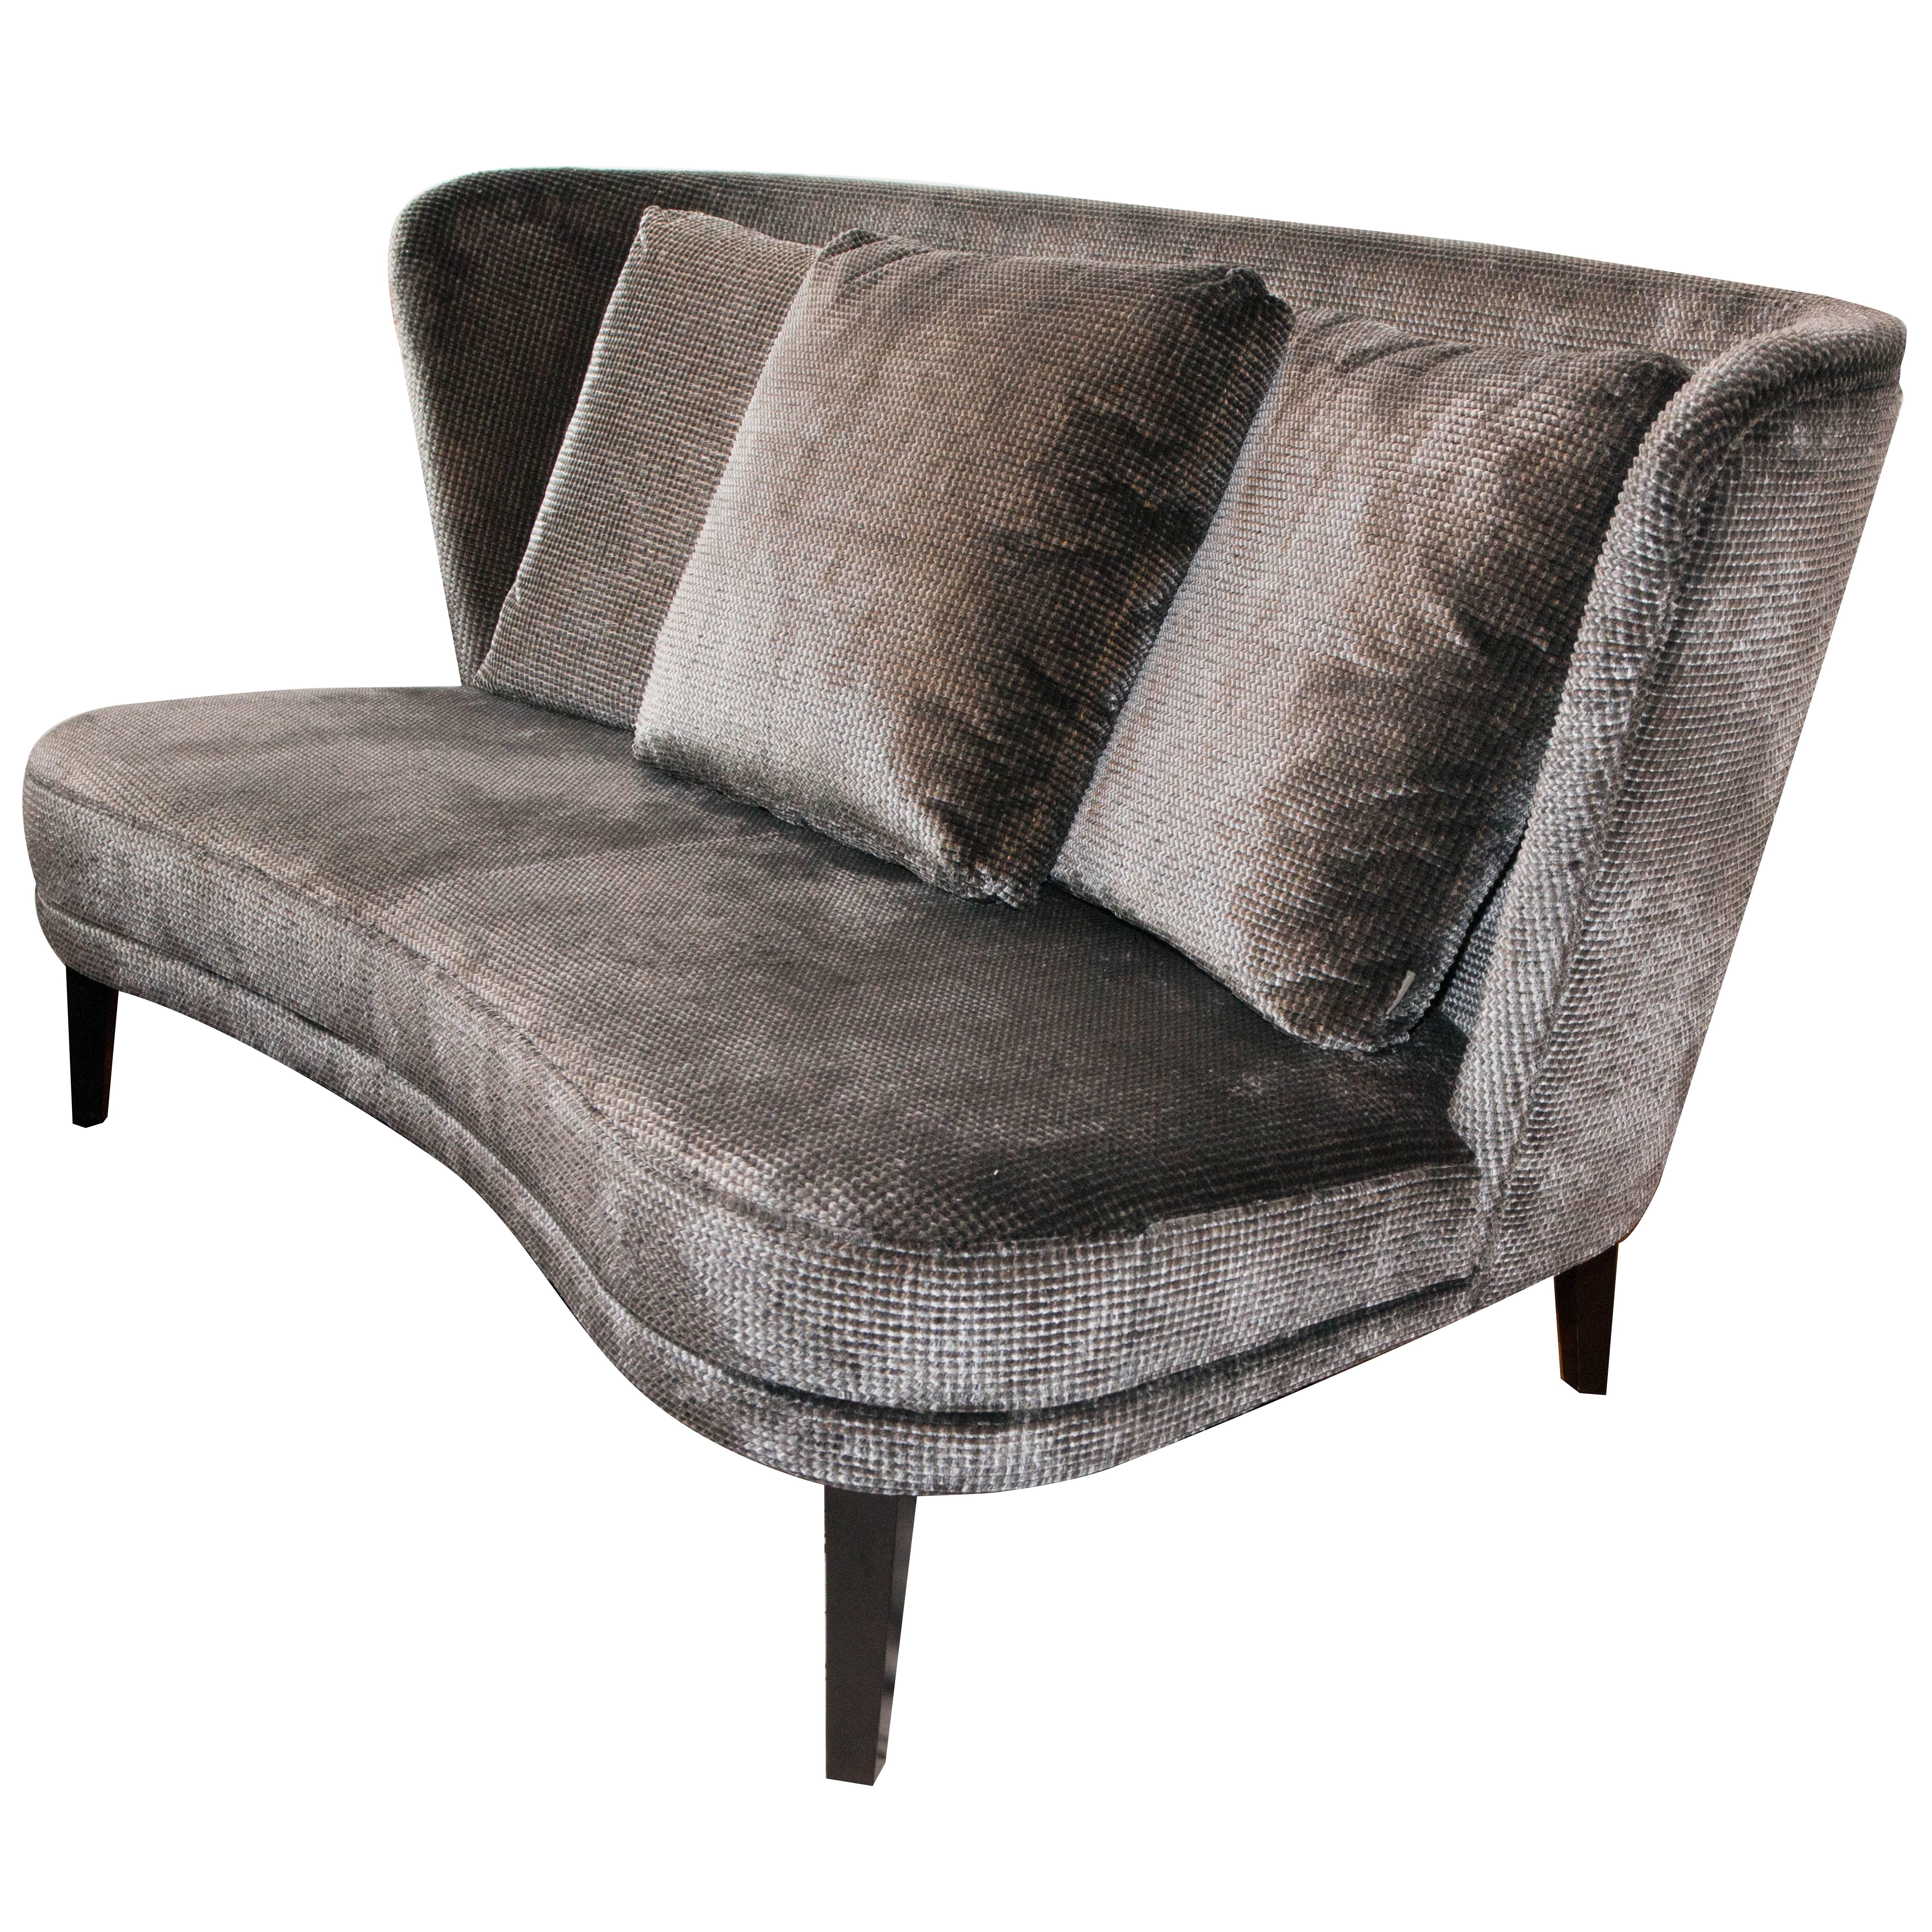 A stunning contemporary model with a graceful, rounded back, this Gabriel lounge has an agreeable seat depth that can be modulated with its independent back cushions for optimal comfort. Upholstered in exclusive cut silk European velvet with a